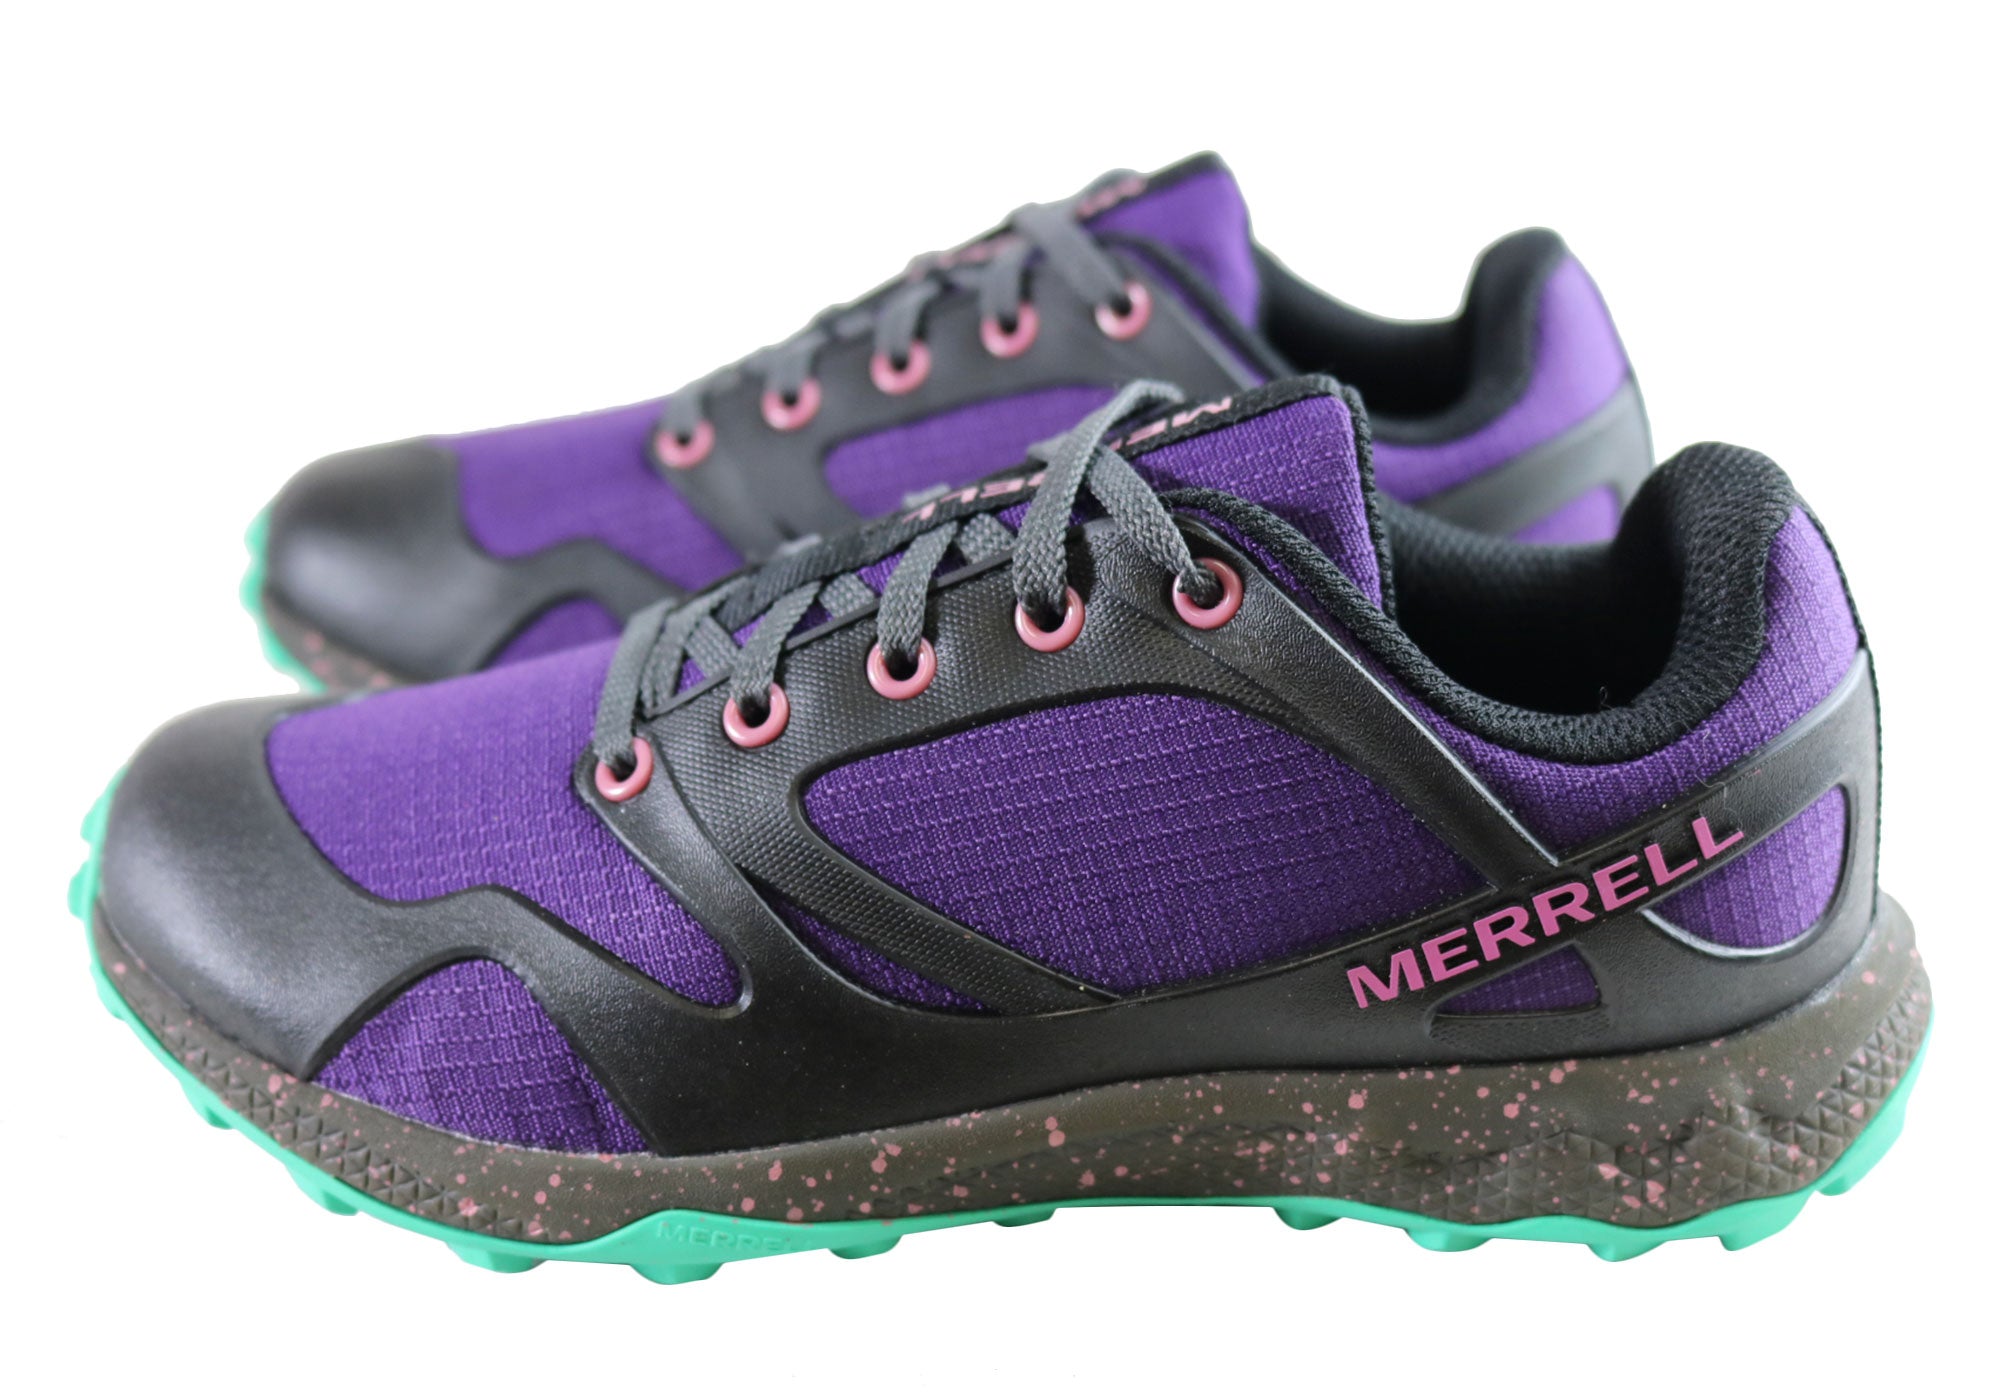 Merrell Junior & Older Kids Altalight Low Comfortable Lace Up Shoes